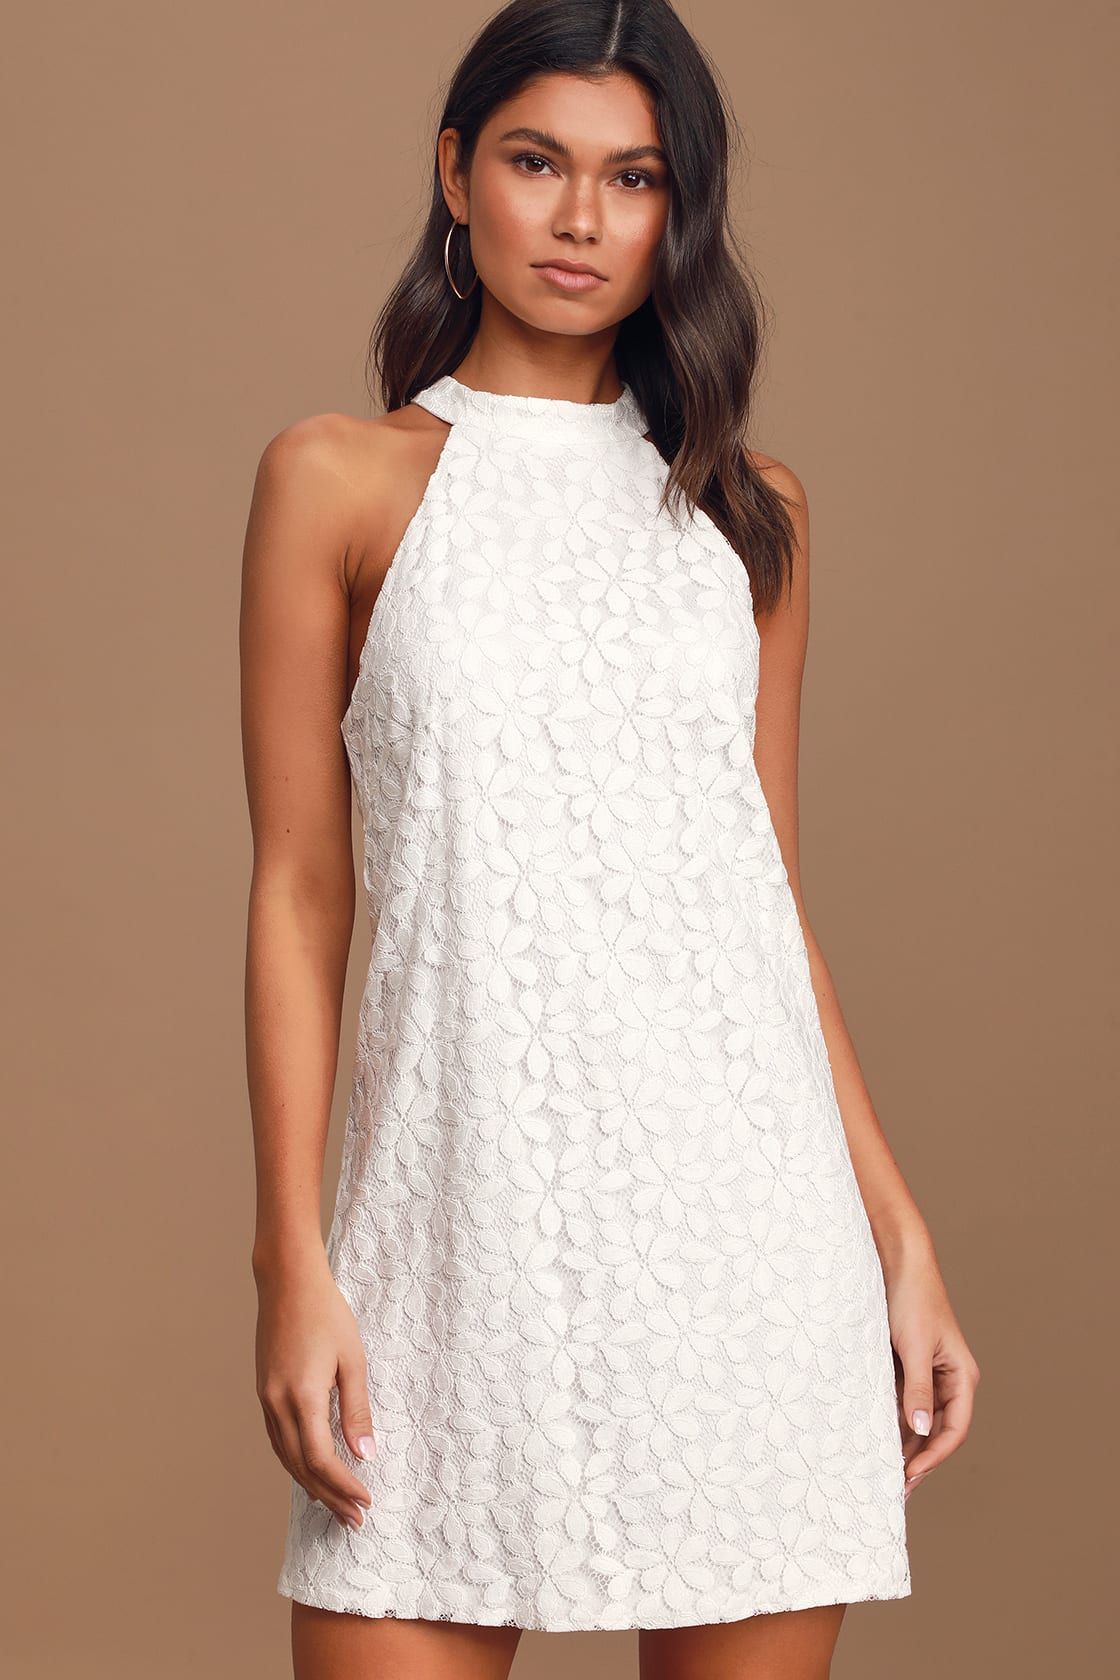 All My Adoration White Lace Halter Shift Dress | Lulus